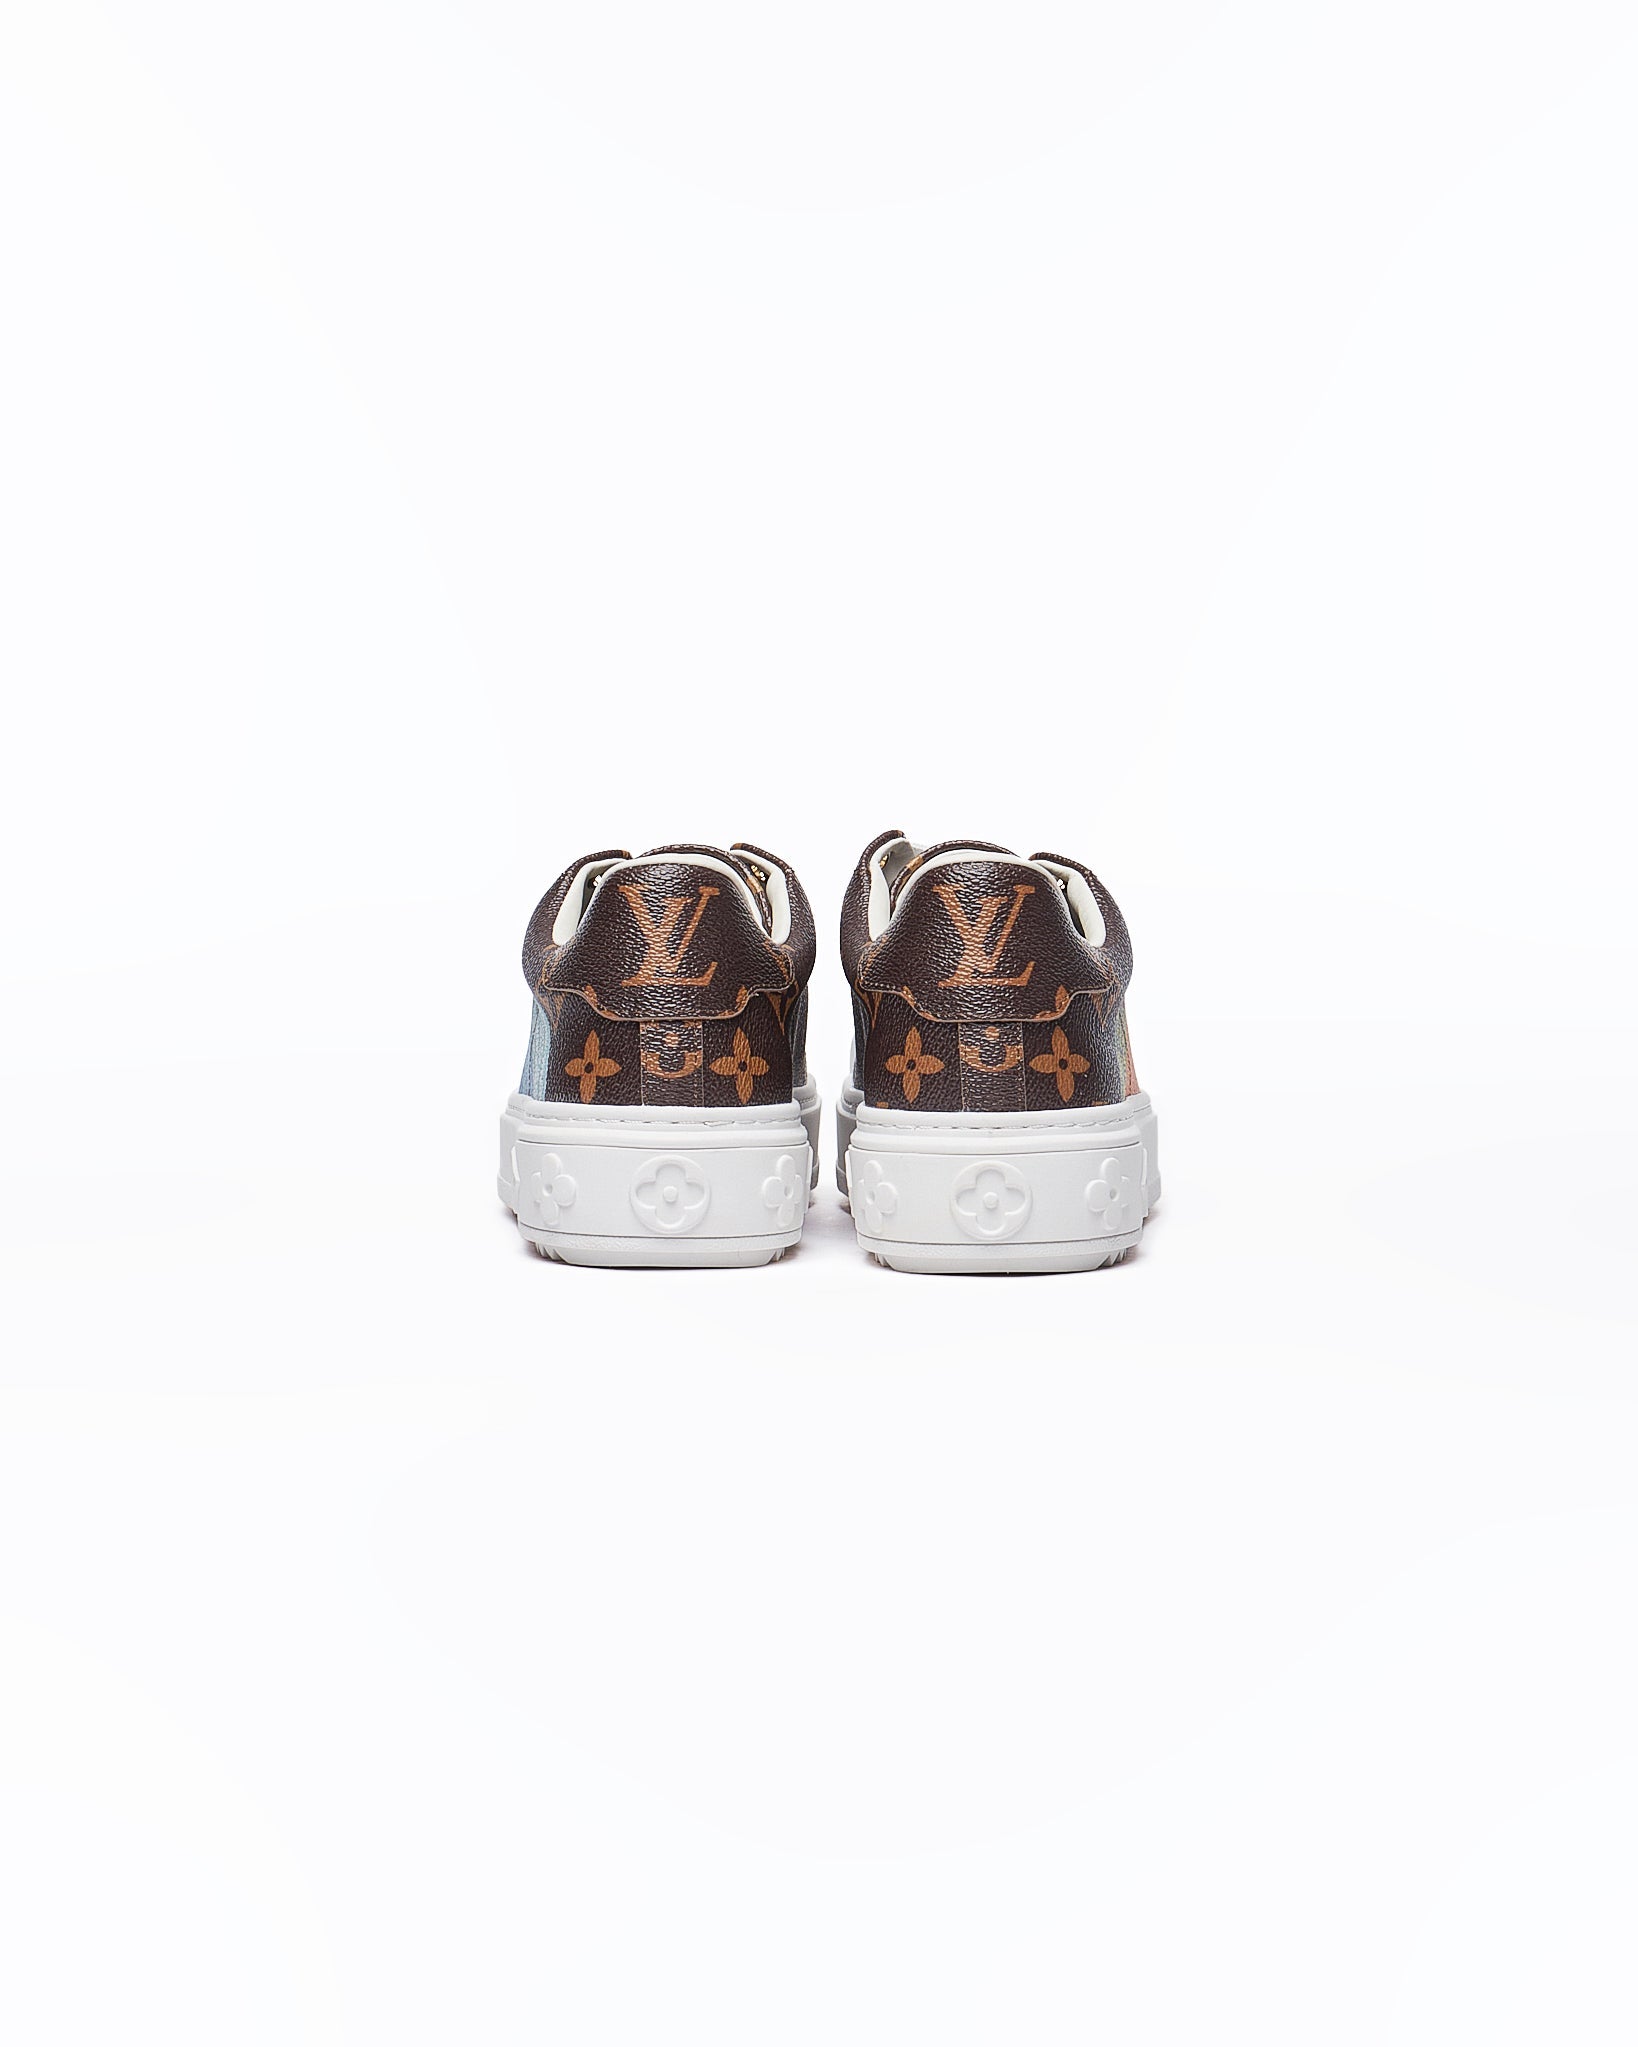 MOI OUTFIT-LV Monogram Lady Brown Sneakers Shoes 105.90